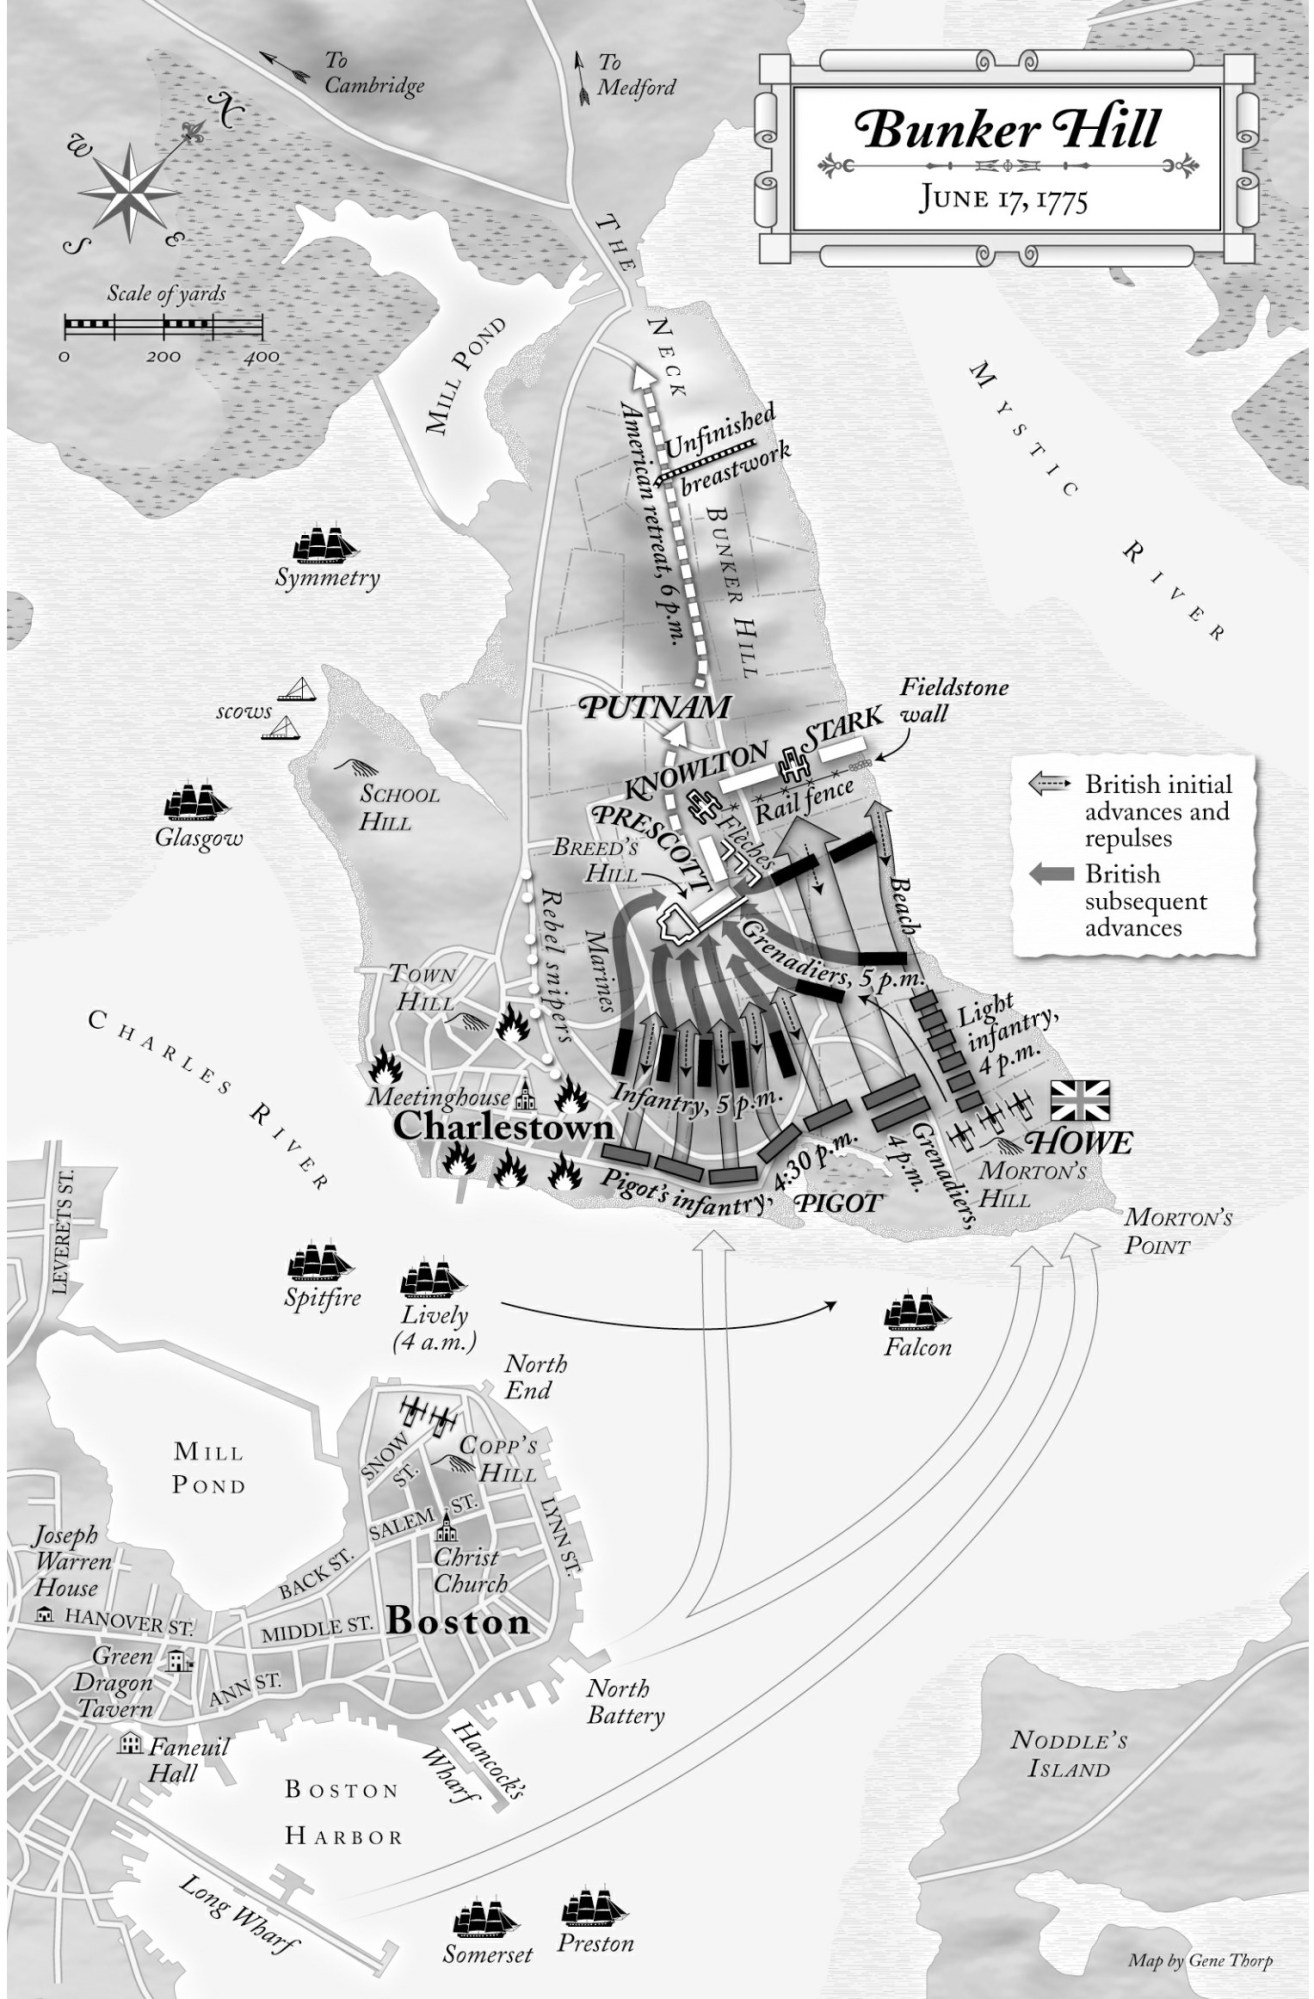 1706507813 818 The Final British Attacks on the Redoubt at Bunker Hill